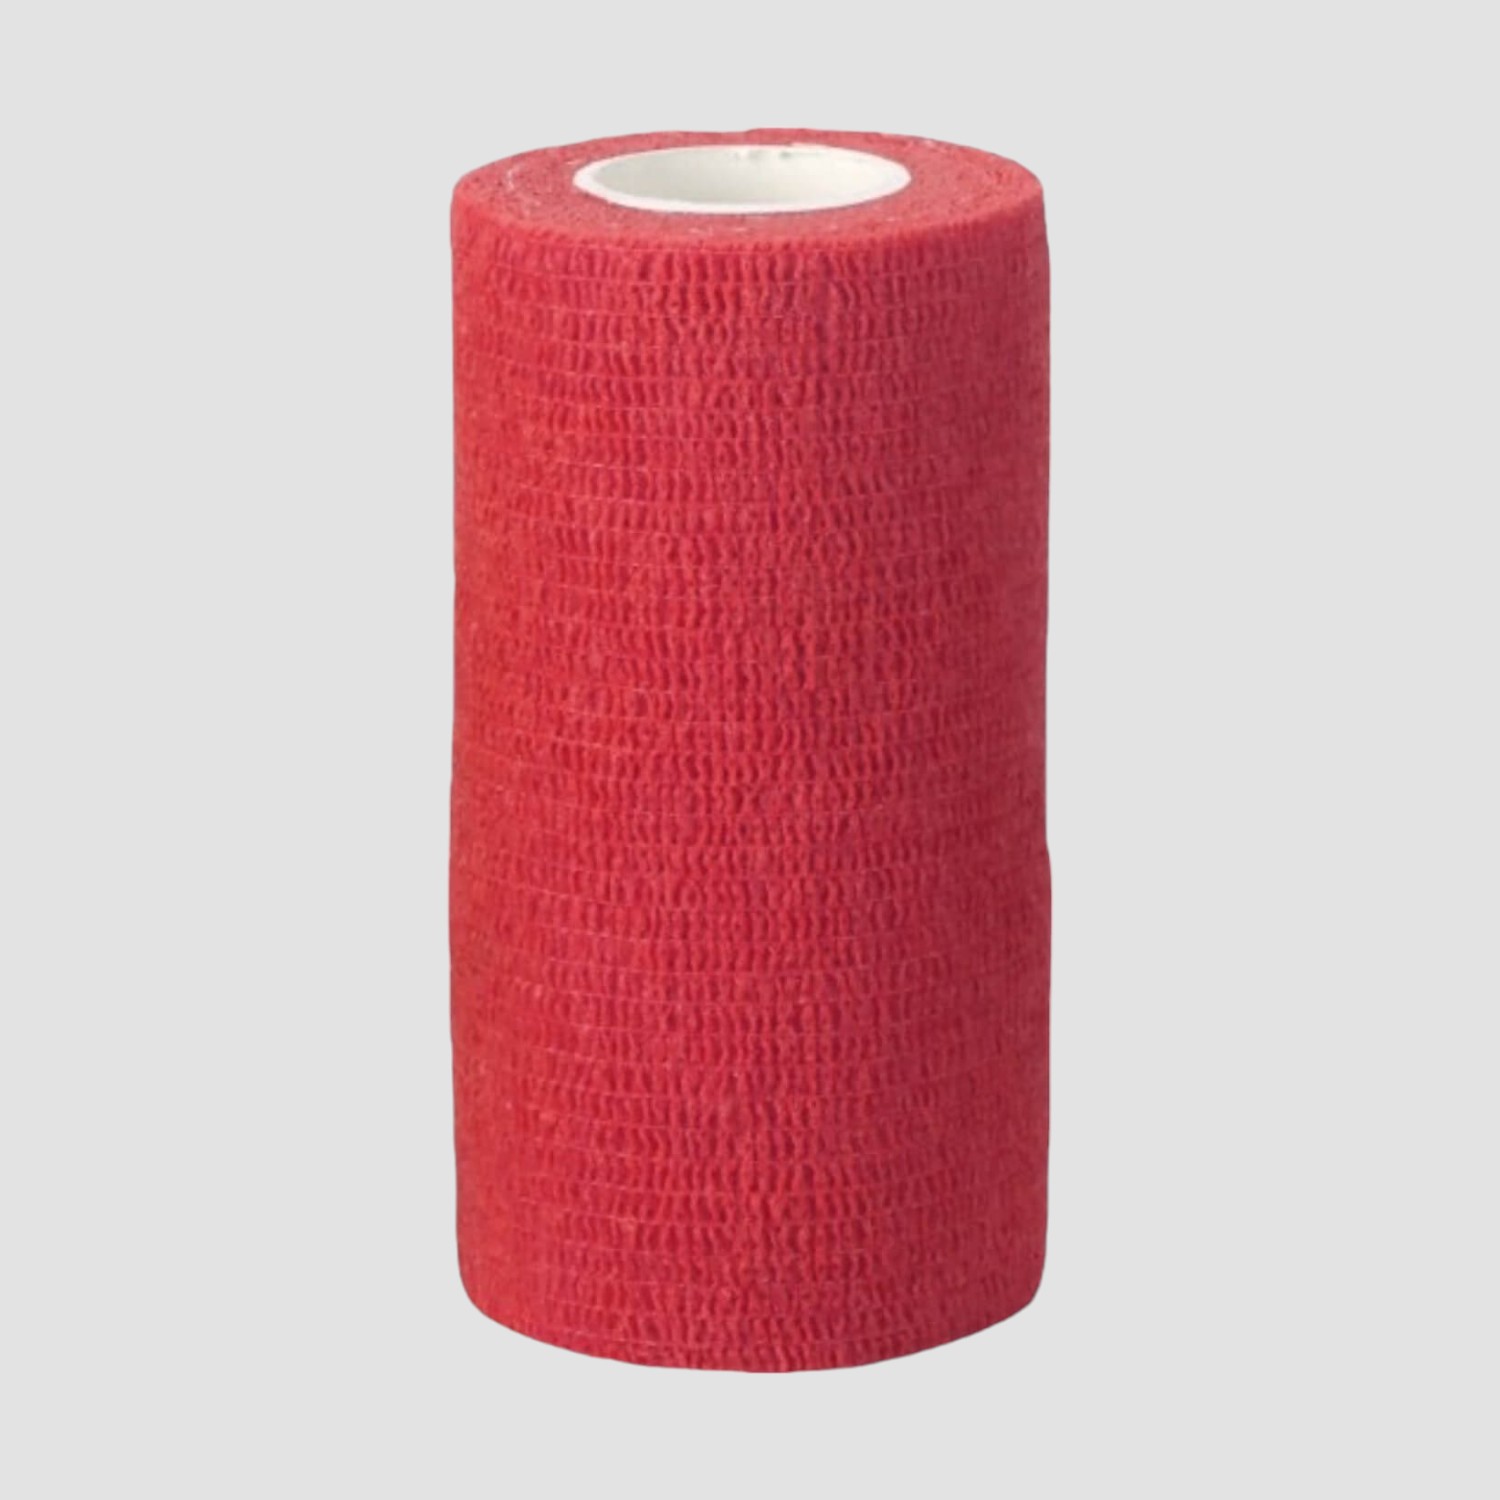 EquiLastic Selbsthaftende Bandage 10 cm Breit